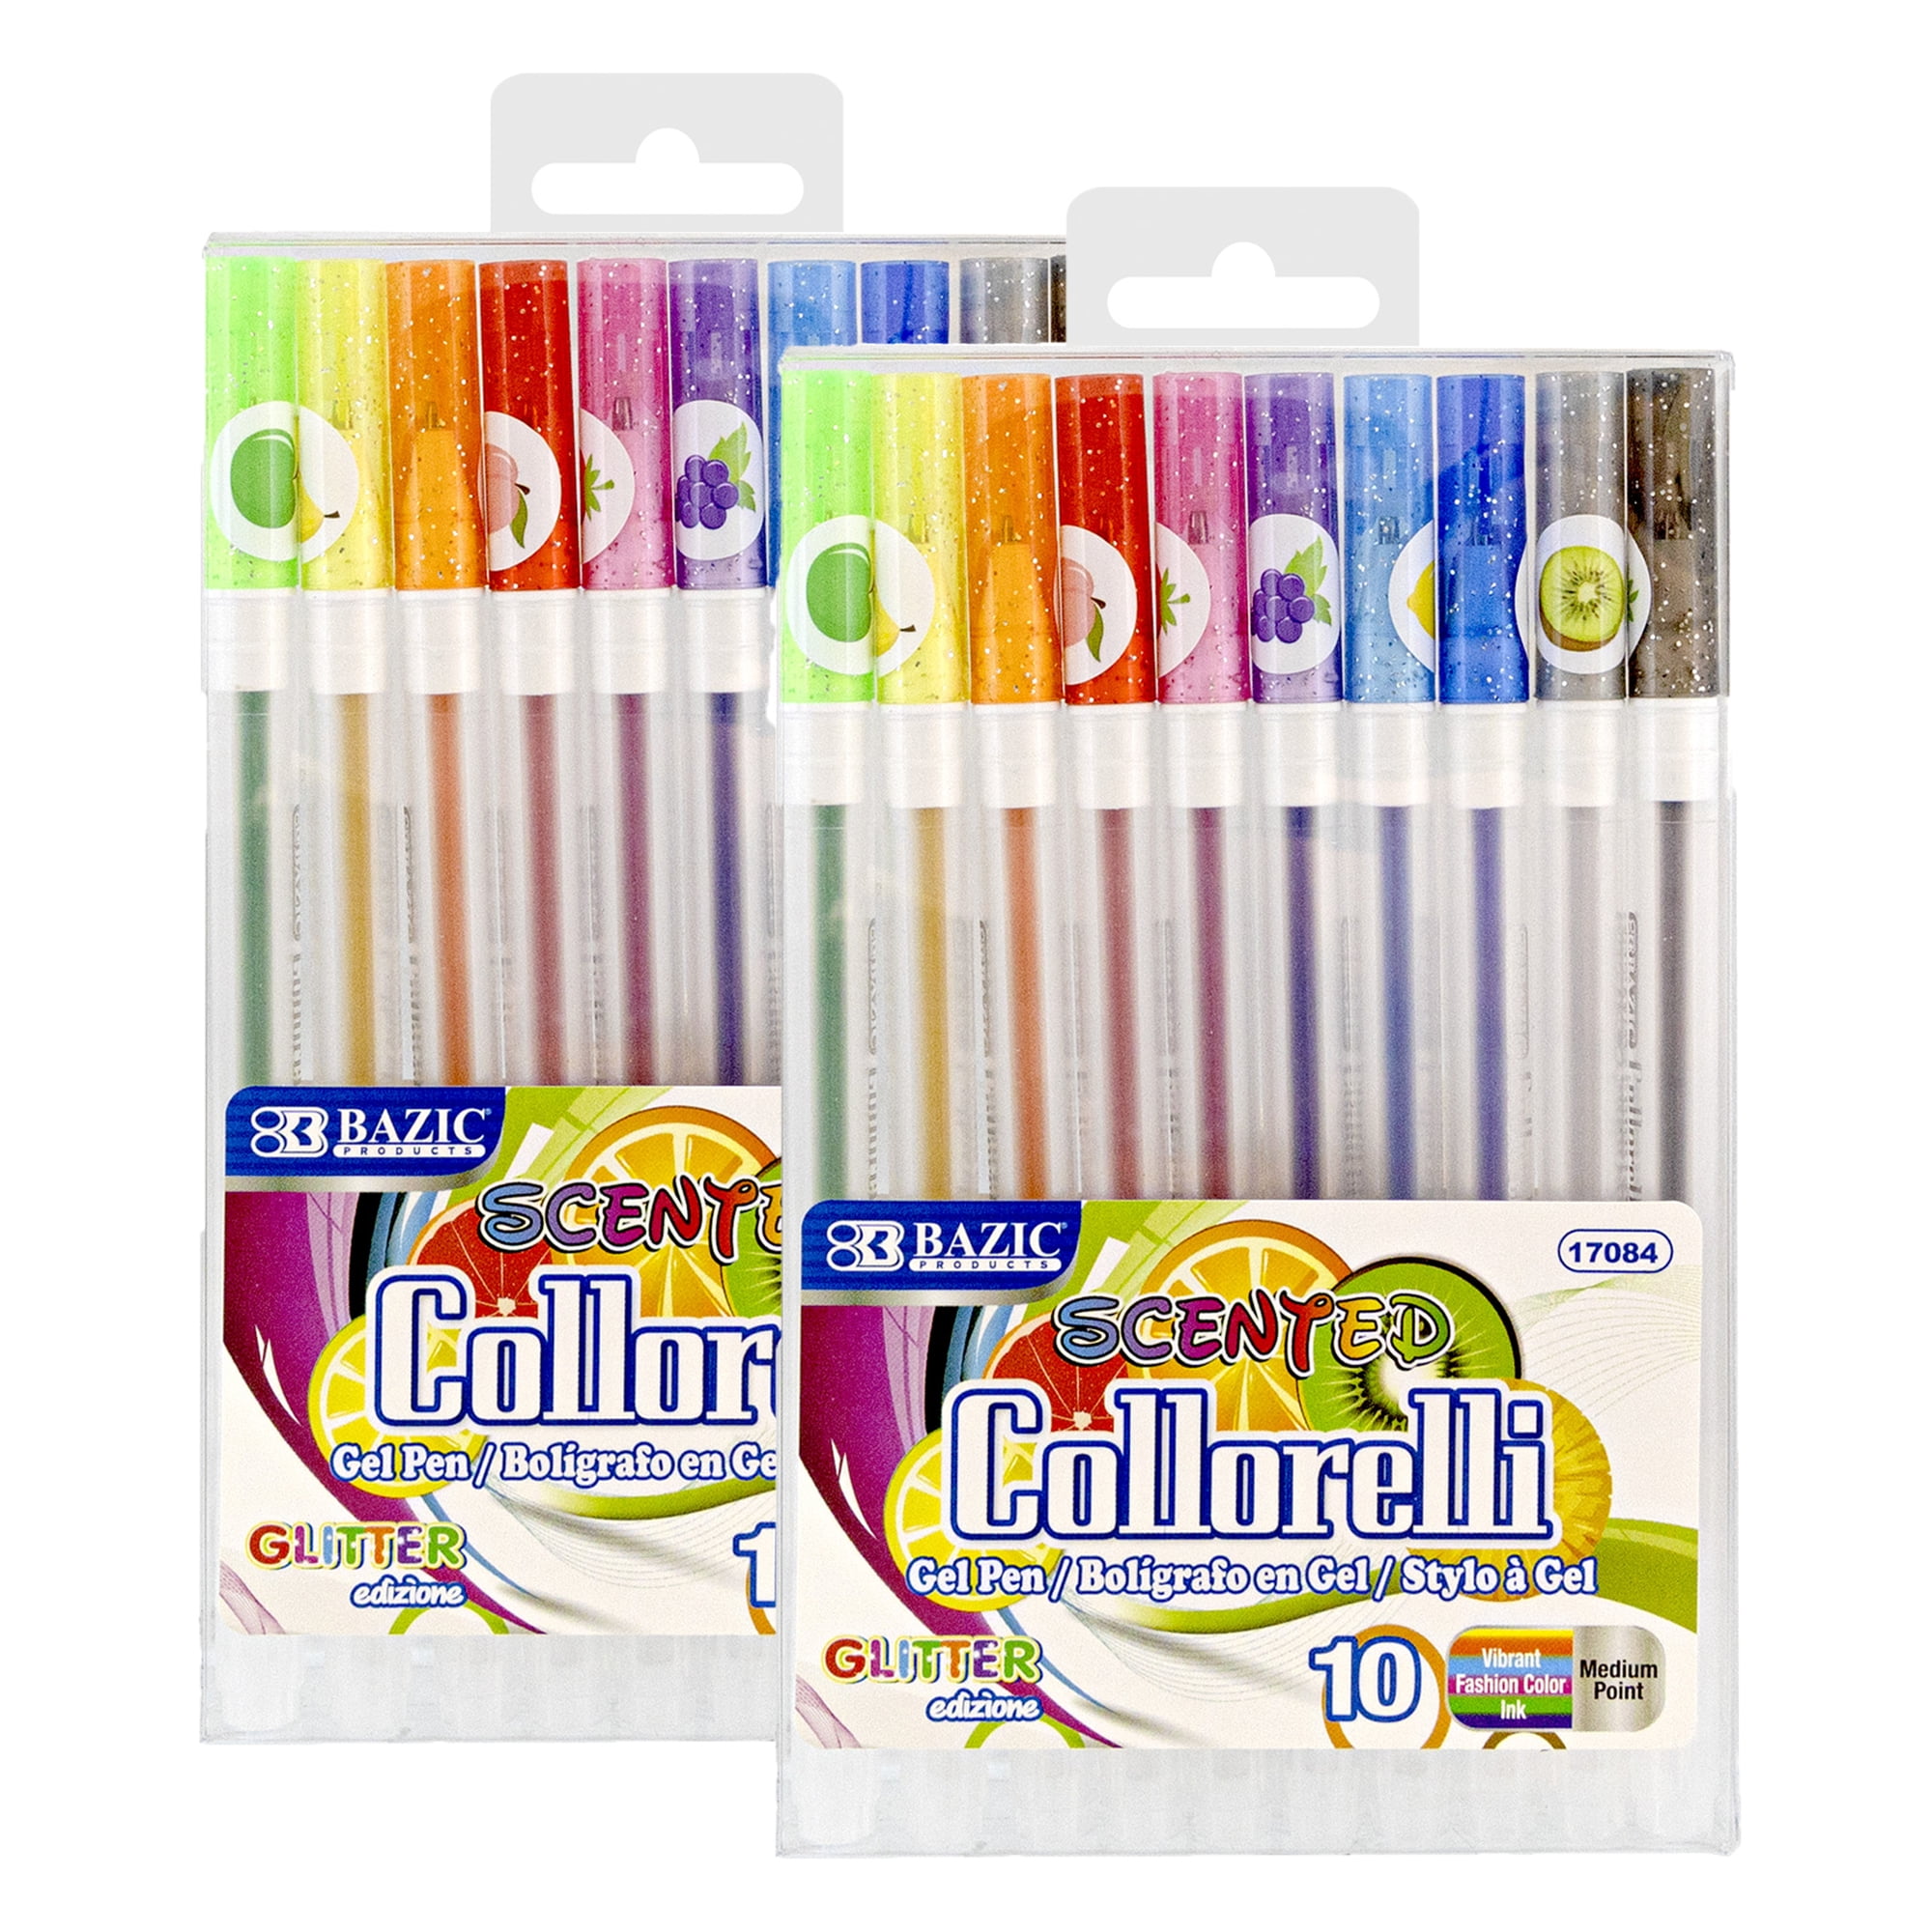 Picture of Bazic Products 17084 Scented Glitter Color Collorelli Gel Pen - Pack of 10